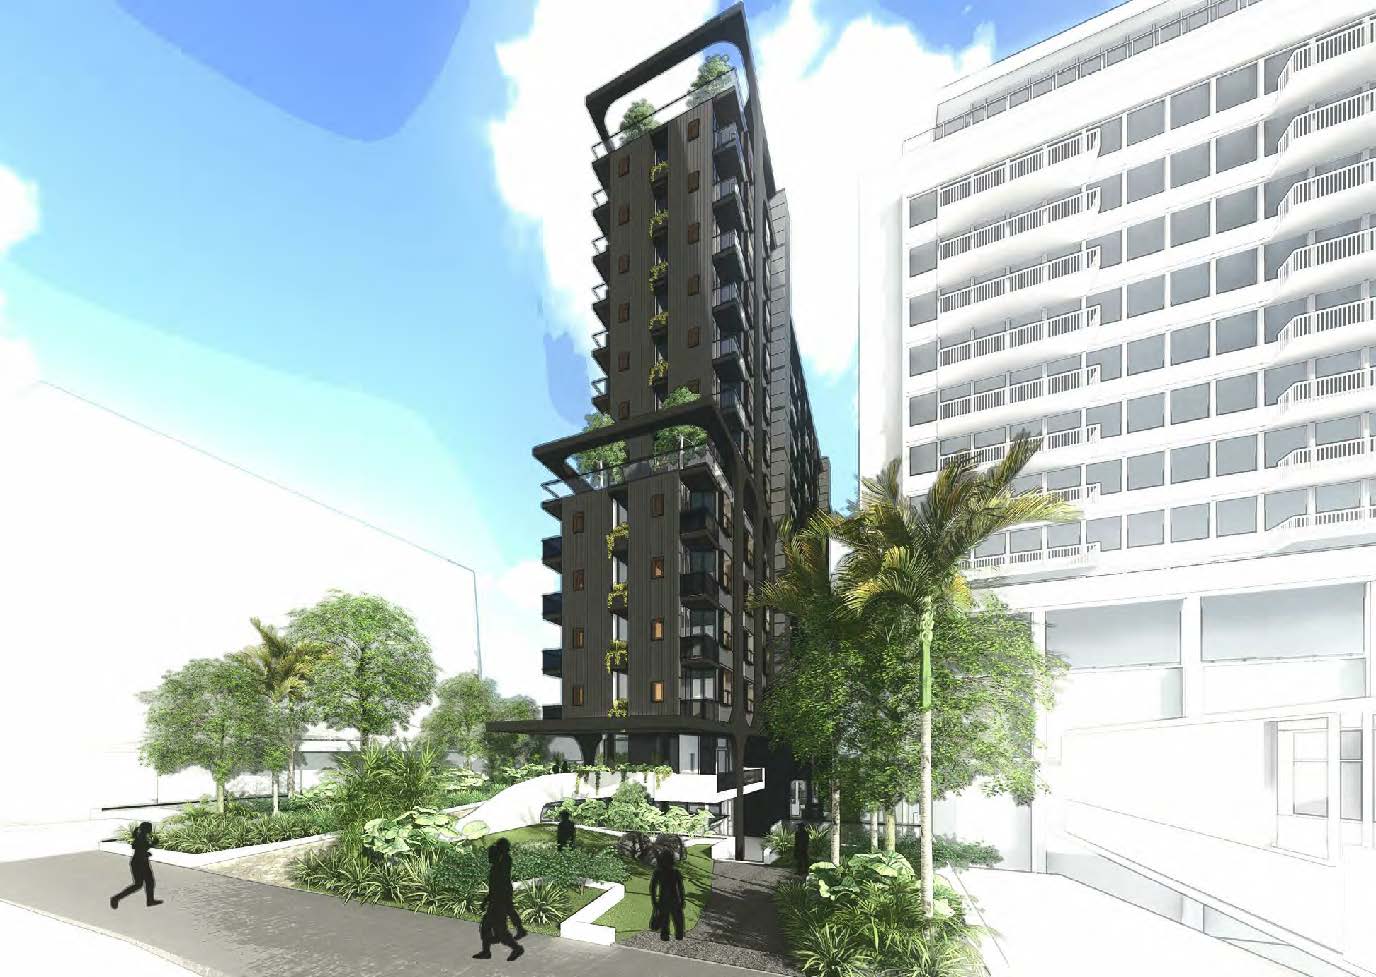 Artist's impression of proposed Boundary Street student accommodation